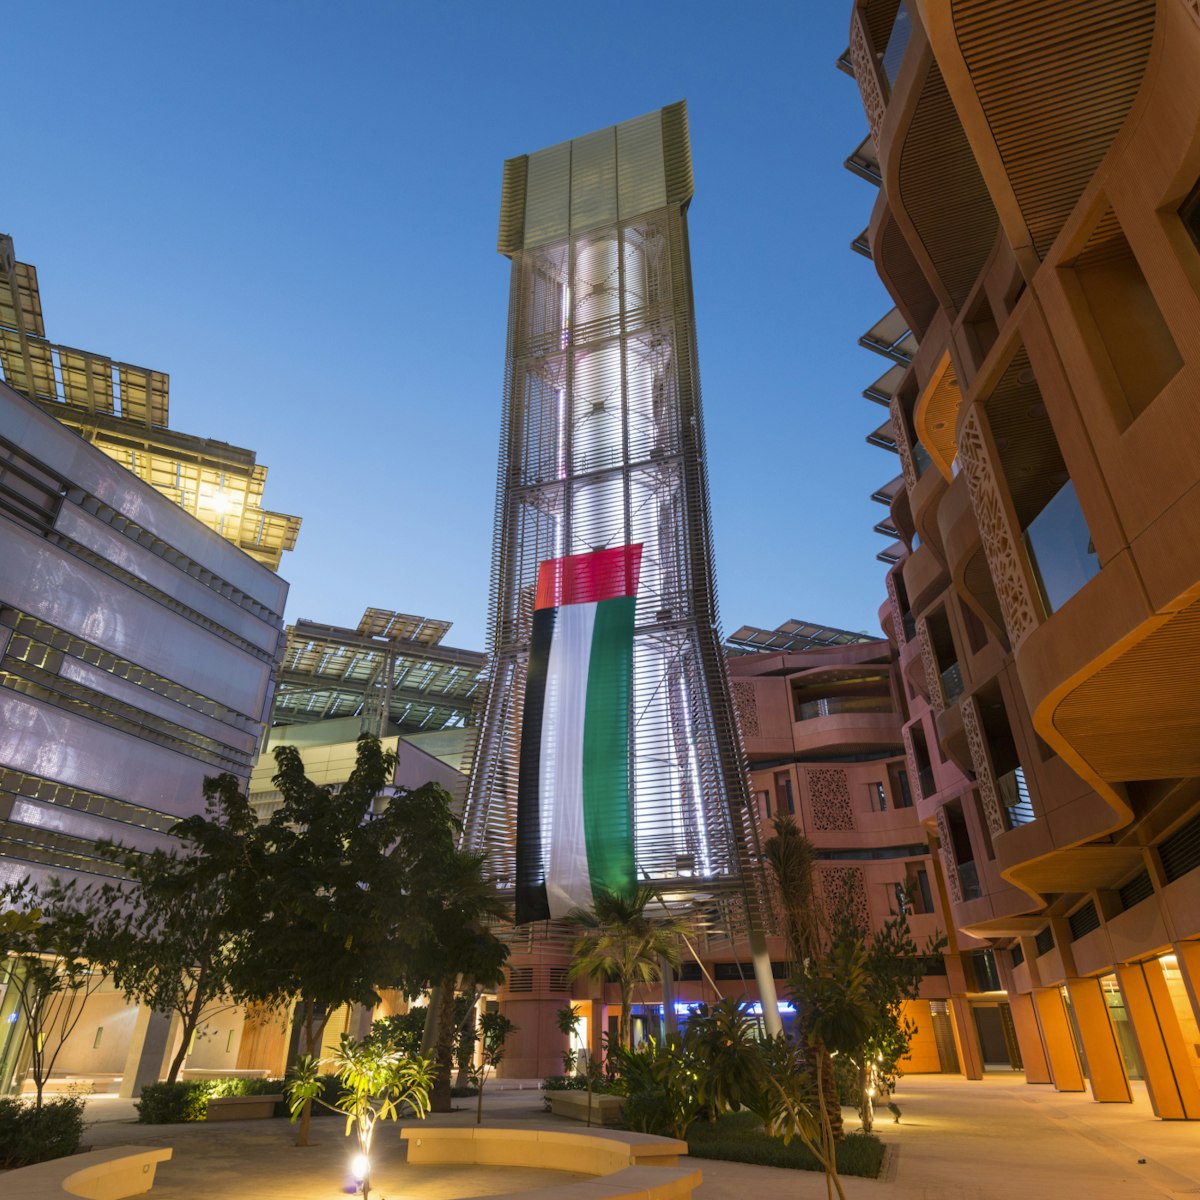 Windtower at Masdar Institute of Science and Technology in Abu Dhabi, United Arab Emirates.